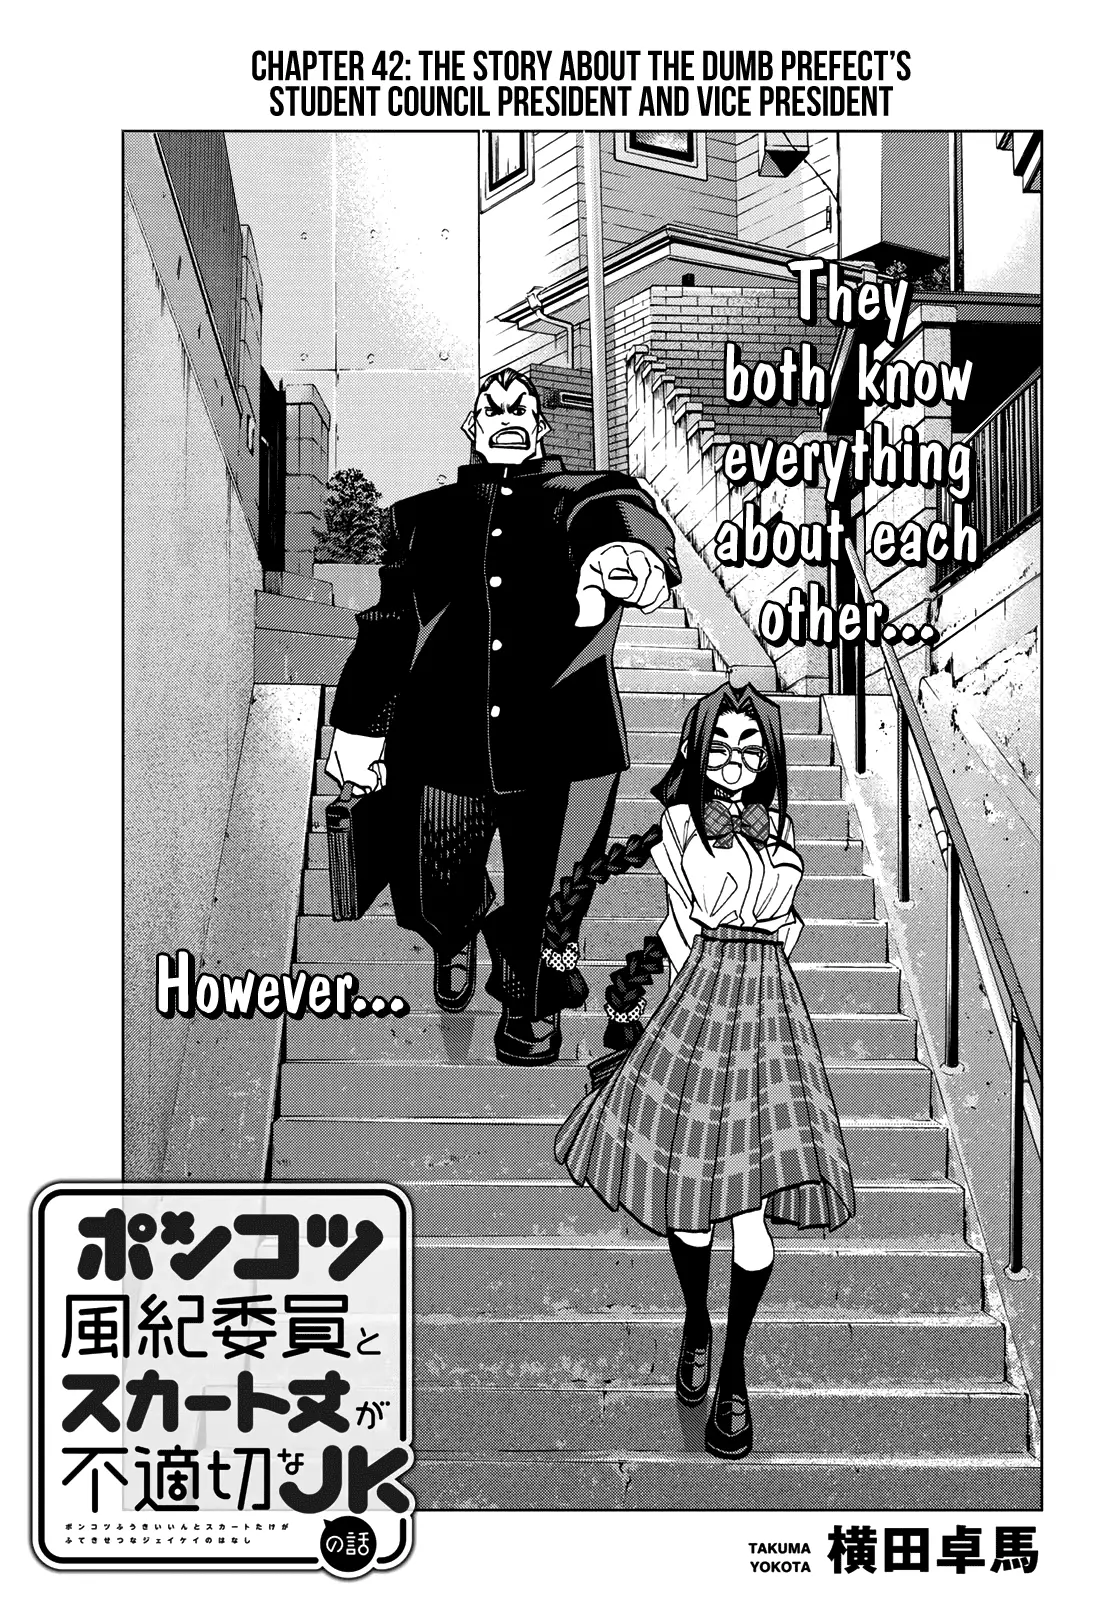 The Story Between A Dumb Prefect And A High School Girl With An Inappropriate Skirt Length - 42 page 1-27967cc1